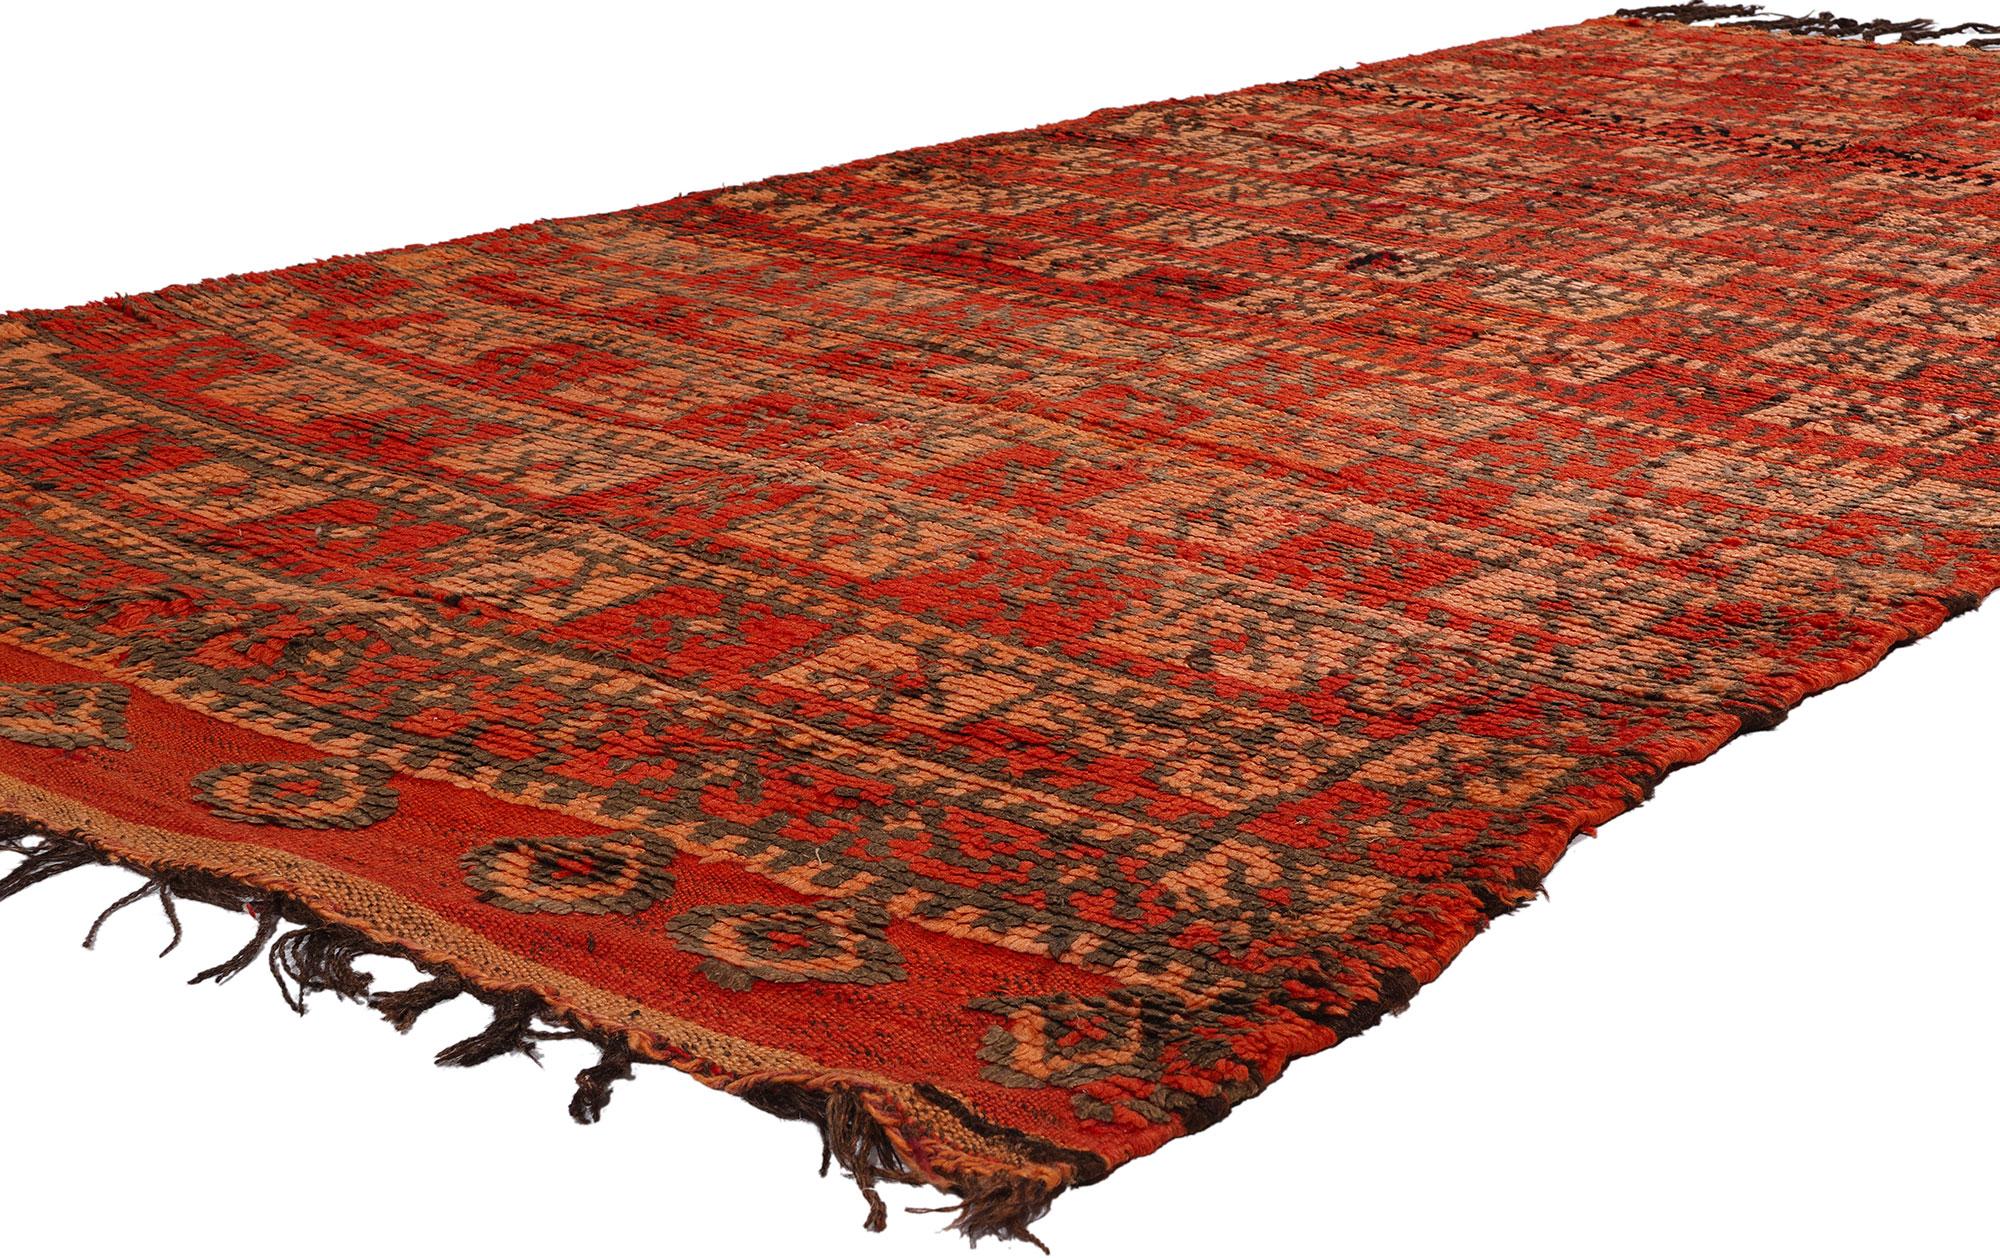 21791 Vintage Red Talsint Moroccan Rug, 05'03 x 11'00. Embark on an entrancing odyssey guided by the captivating geometry interlaced within this meticulously crafted vintage Talsint Moroccan rug. Originating from the mystical Figuig region in